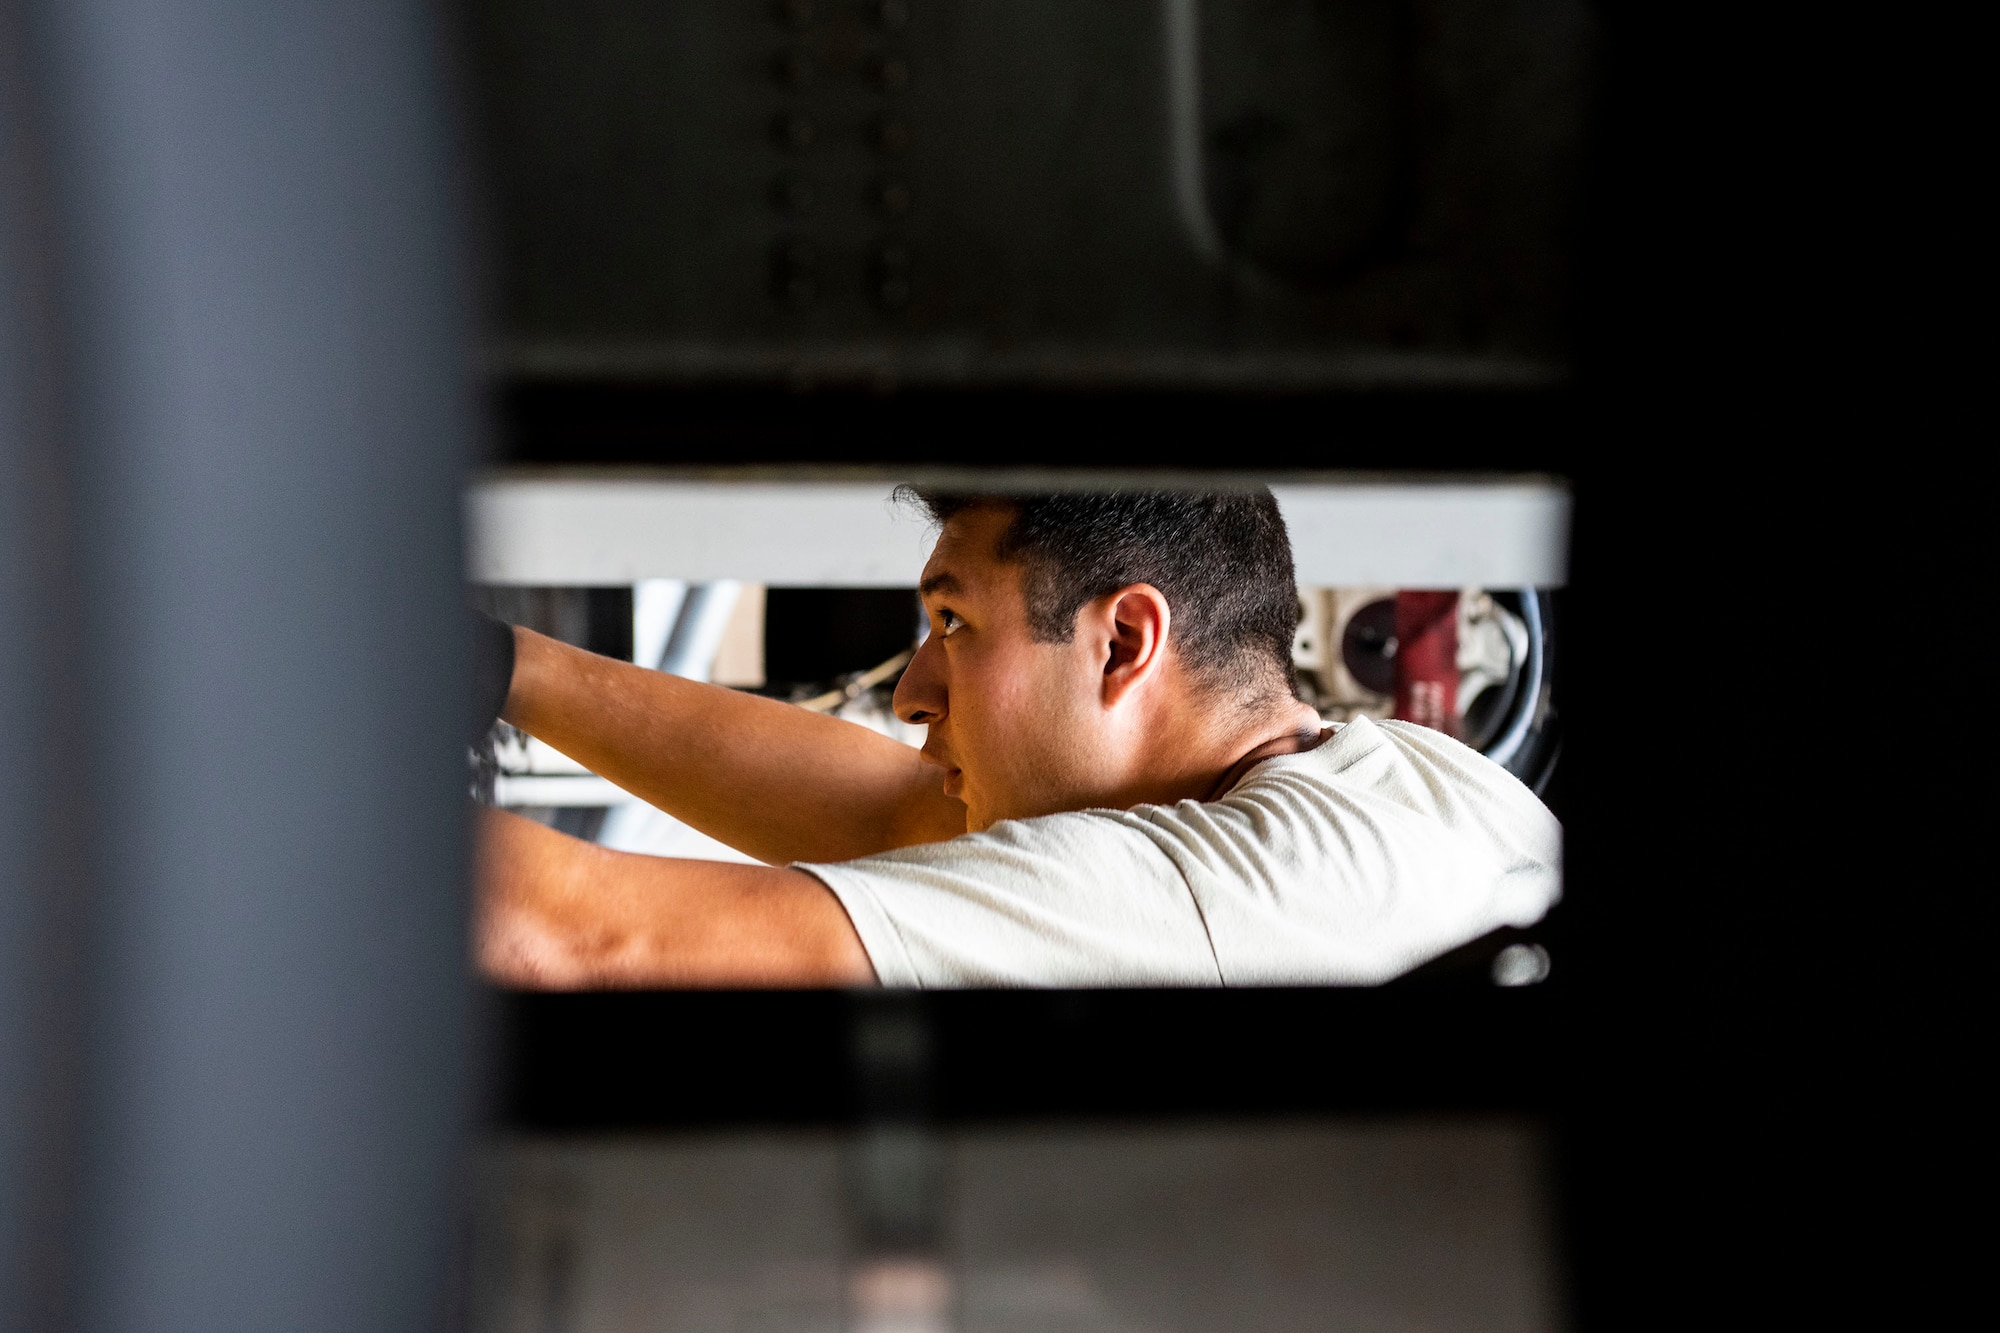 Staff Sgt. George Lorr, 71st Aircraft Maintenance Unit crew chief, coordinates the alignment of shorings to associated fuselage stations during preparation of an HC-130J Combat King II for a situational awareness communication upgrade (SACU) modification Sept. 25, 2019, at Moody Air Force Base, Ga. The shorings allow the aircraft to be put into a state of “no-loading”, where the pressure and weight of the aircraft will be reduced, allowing the modifications to be implemented without damage to the aircraft’s hull integrity.  This SACU will enhance the aircraft’s ability to communicate with personnel on the ground during search and rescue operations. (U.S. Air Force photo by Senior Airman Erick Requadt)